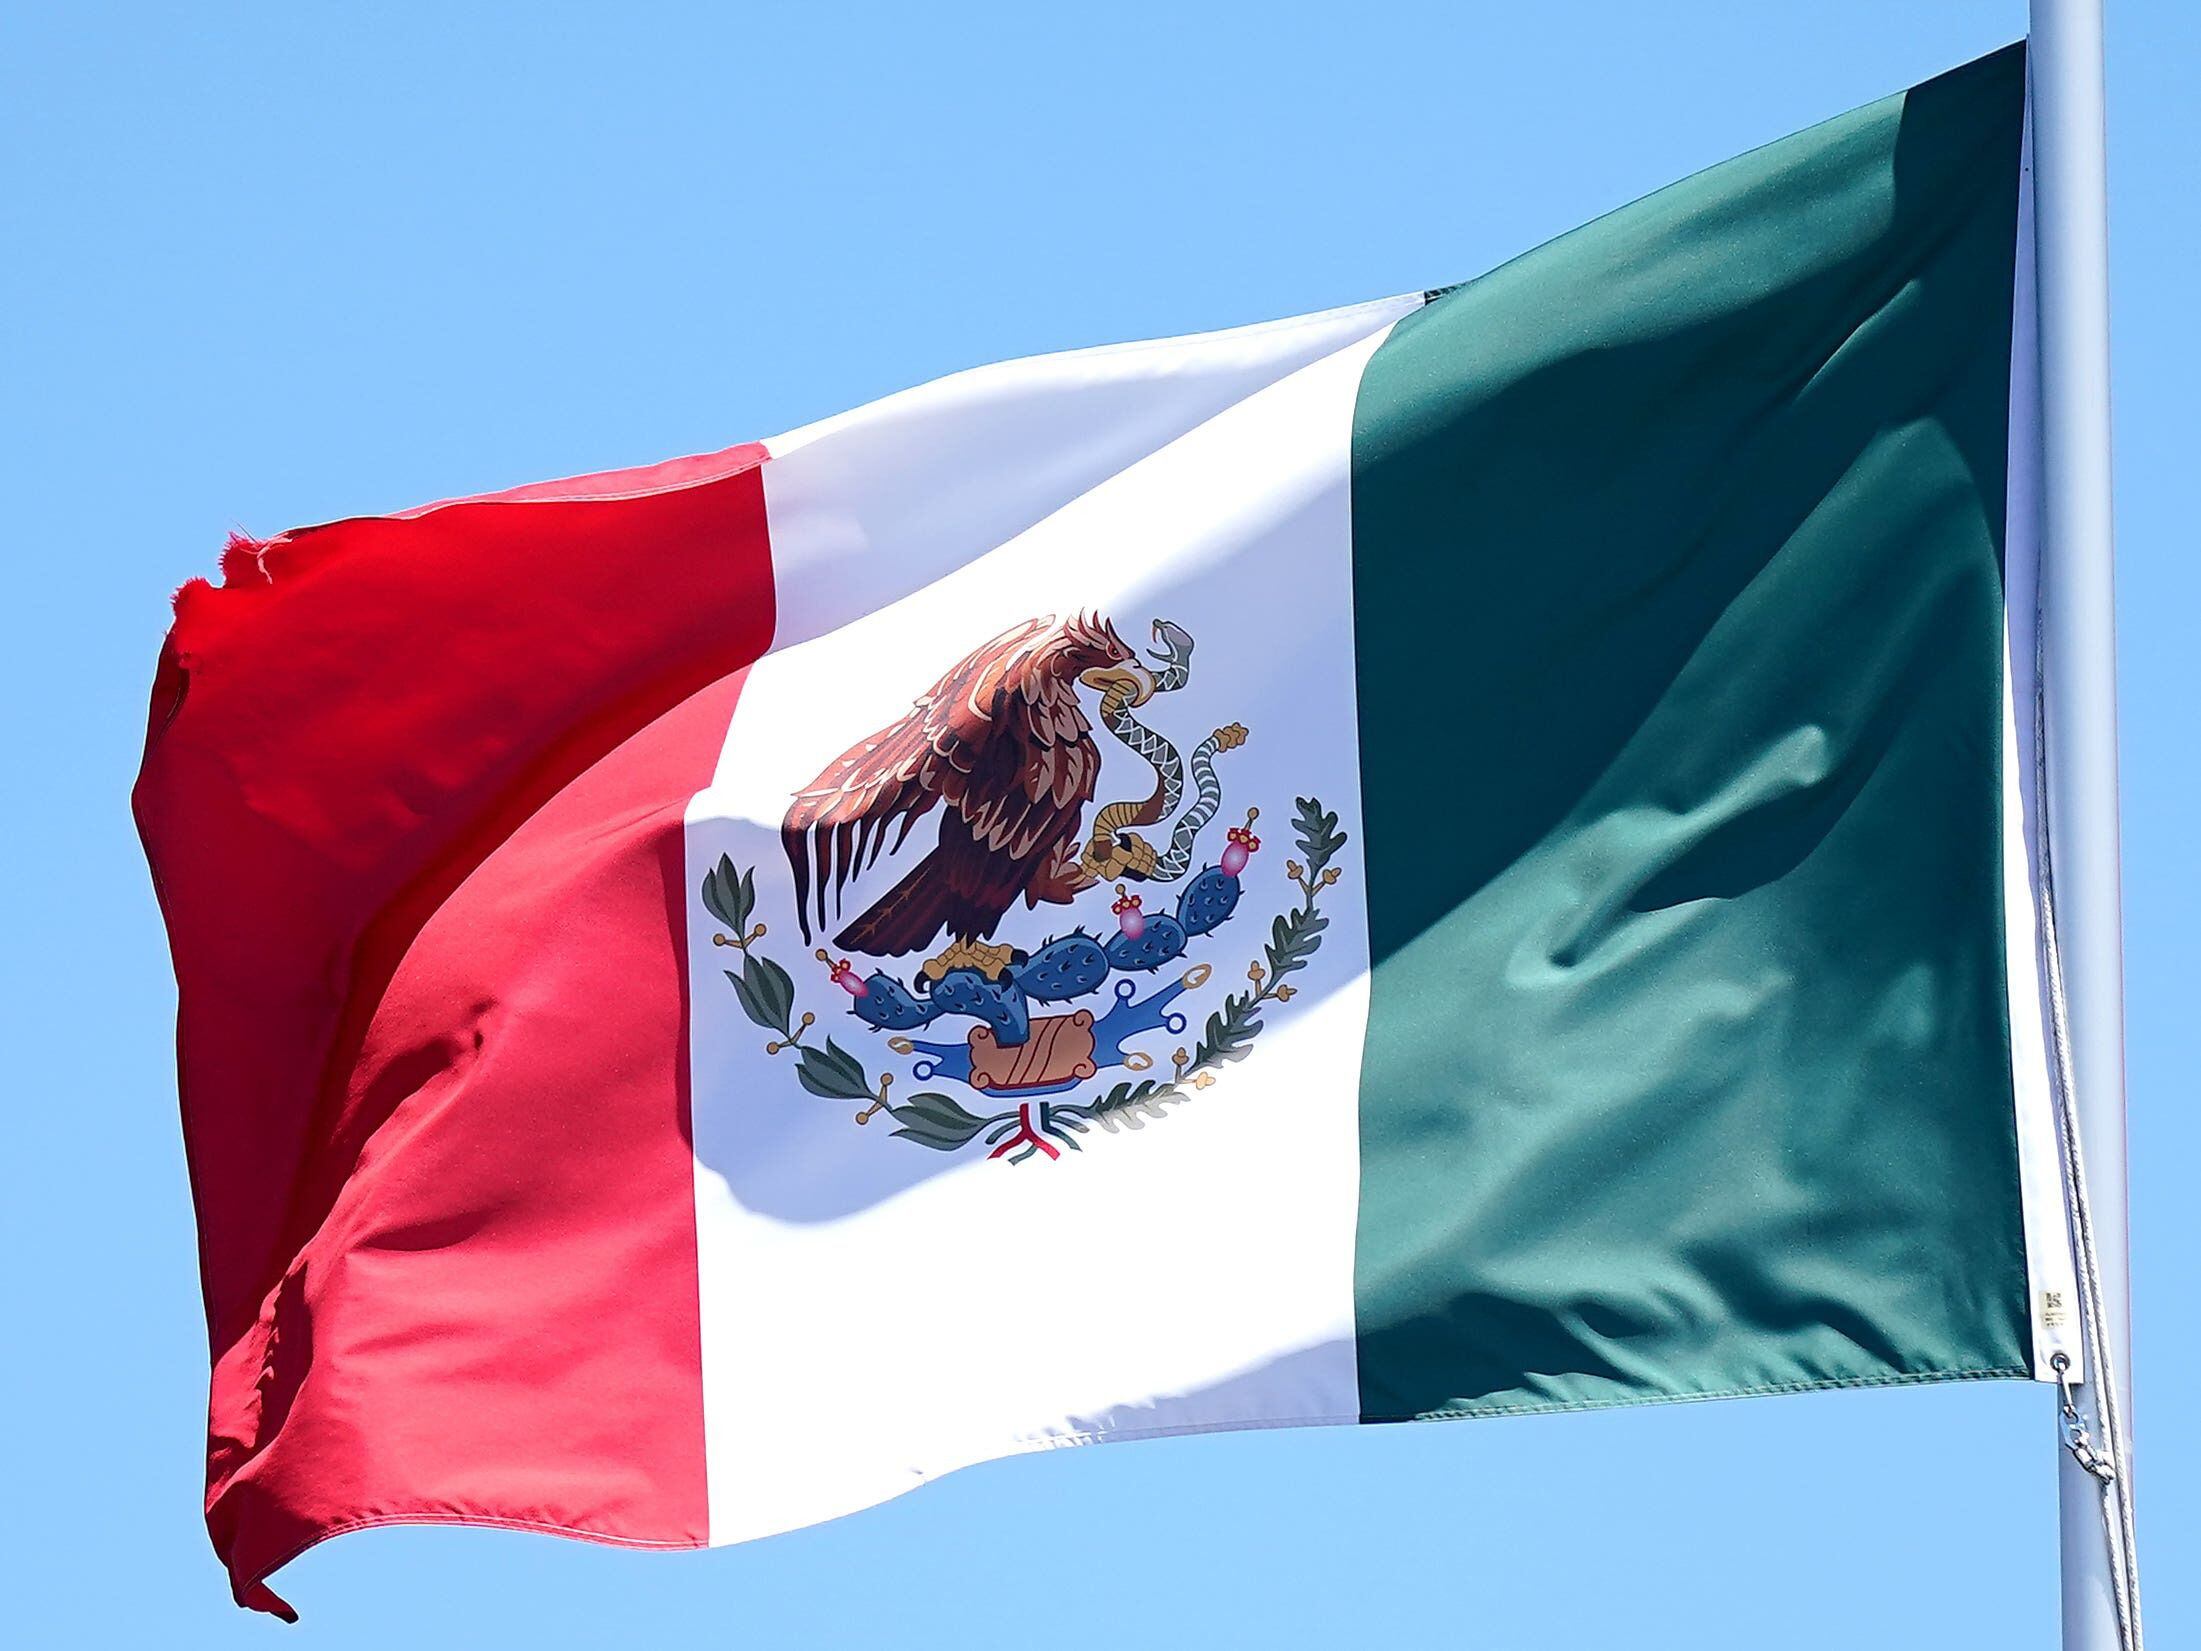 UK’s ambassador to Mexico ‘sacked after pointing gun at staff’